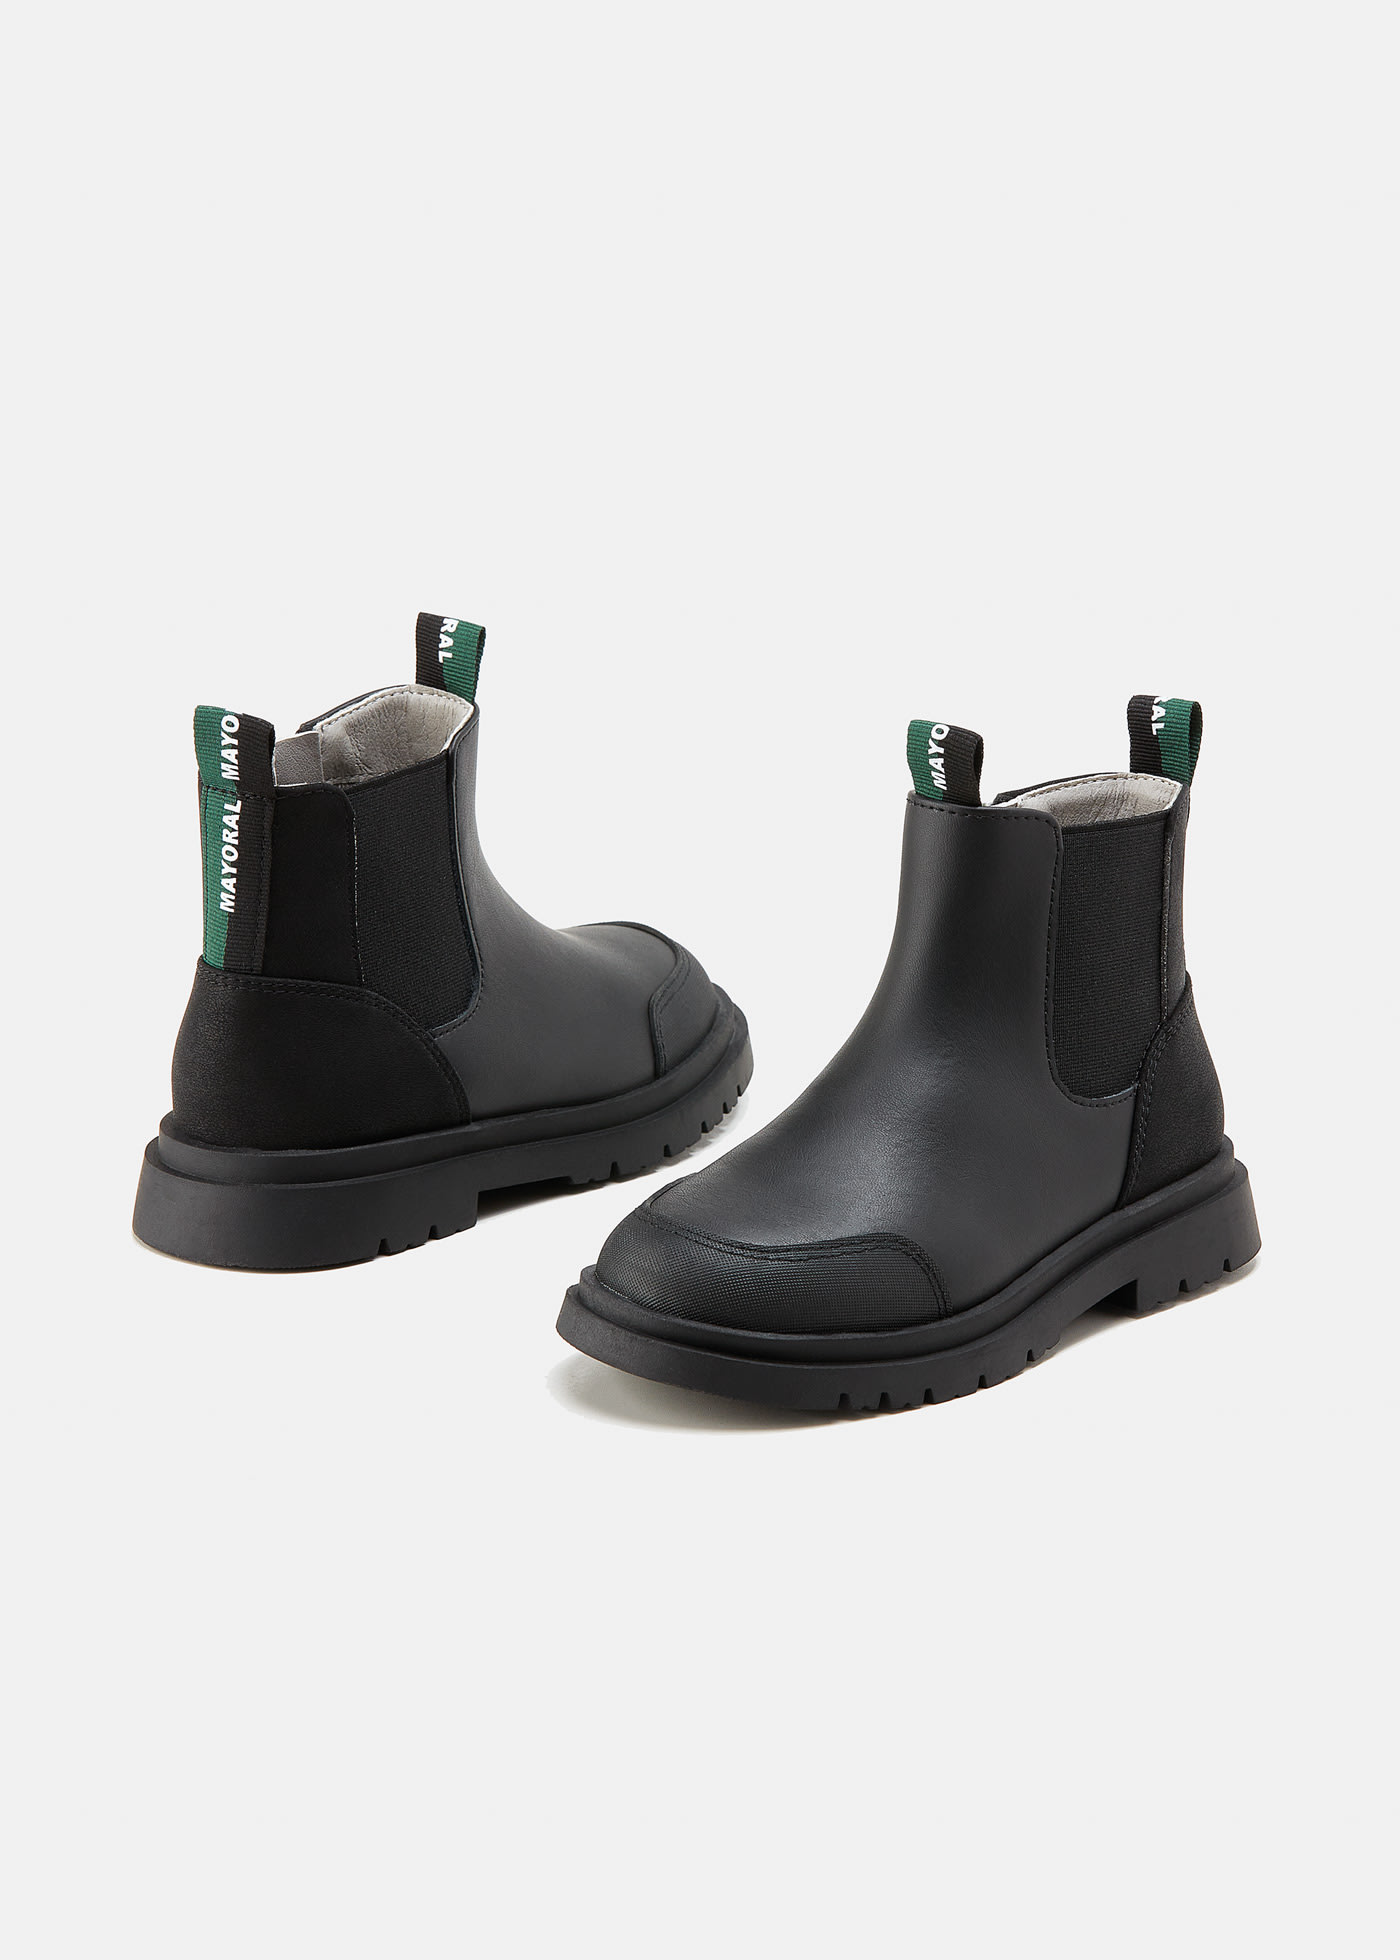 Chelsea boots sustainable leather boy